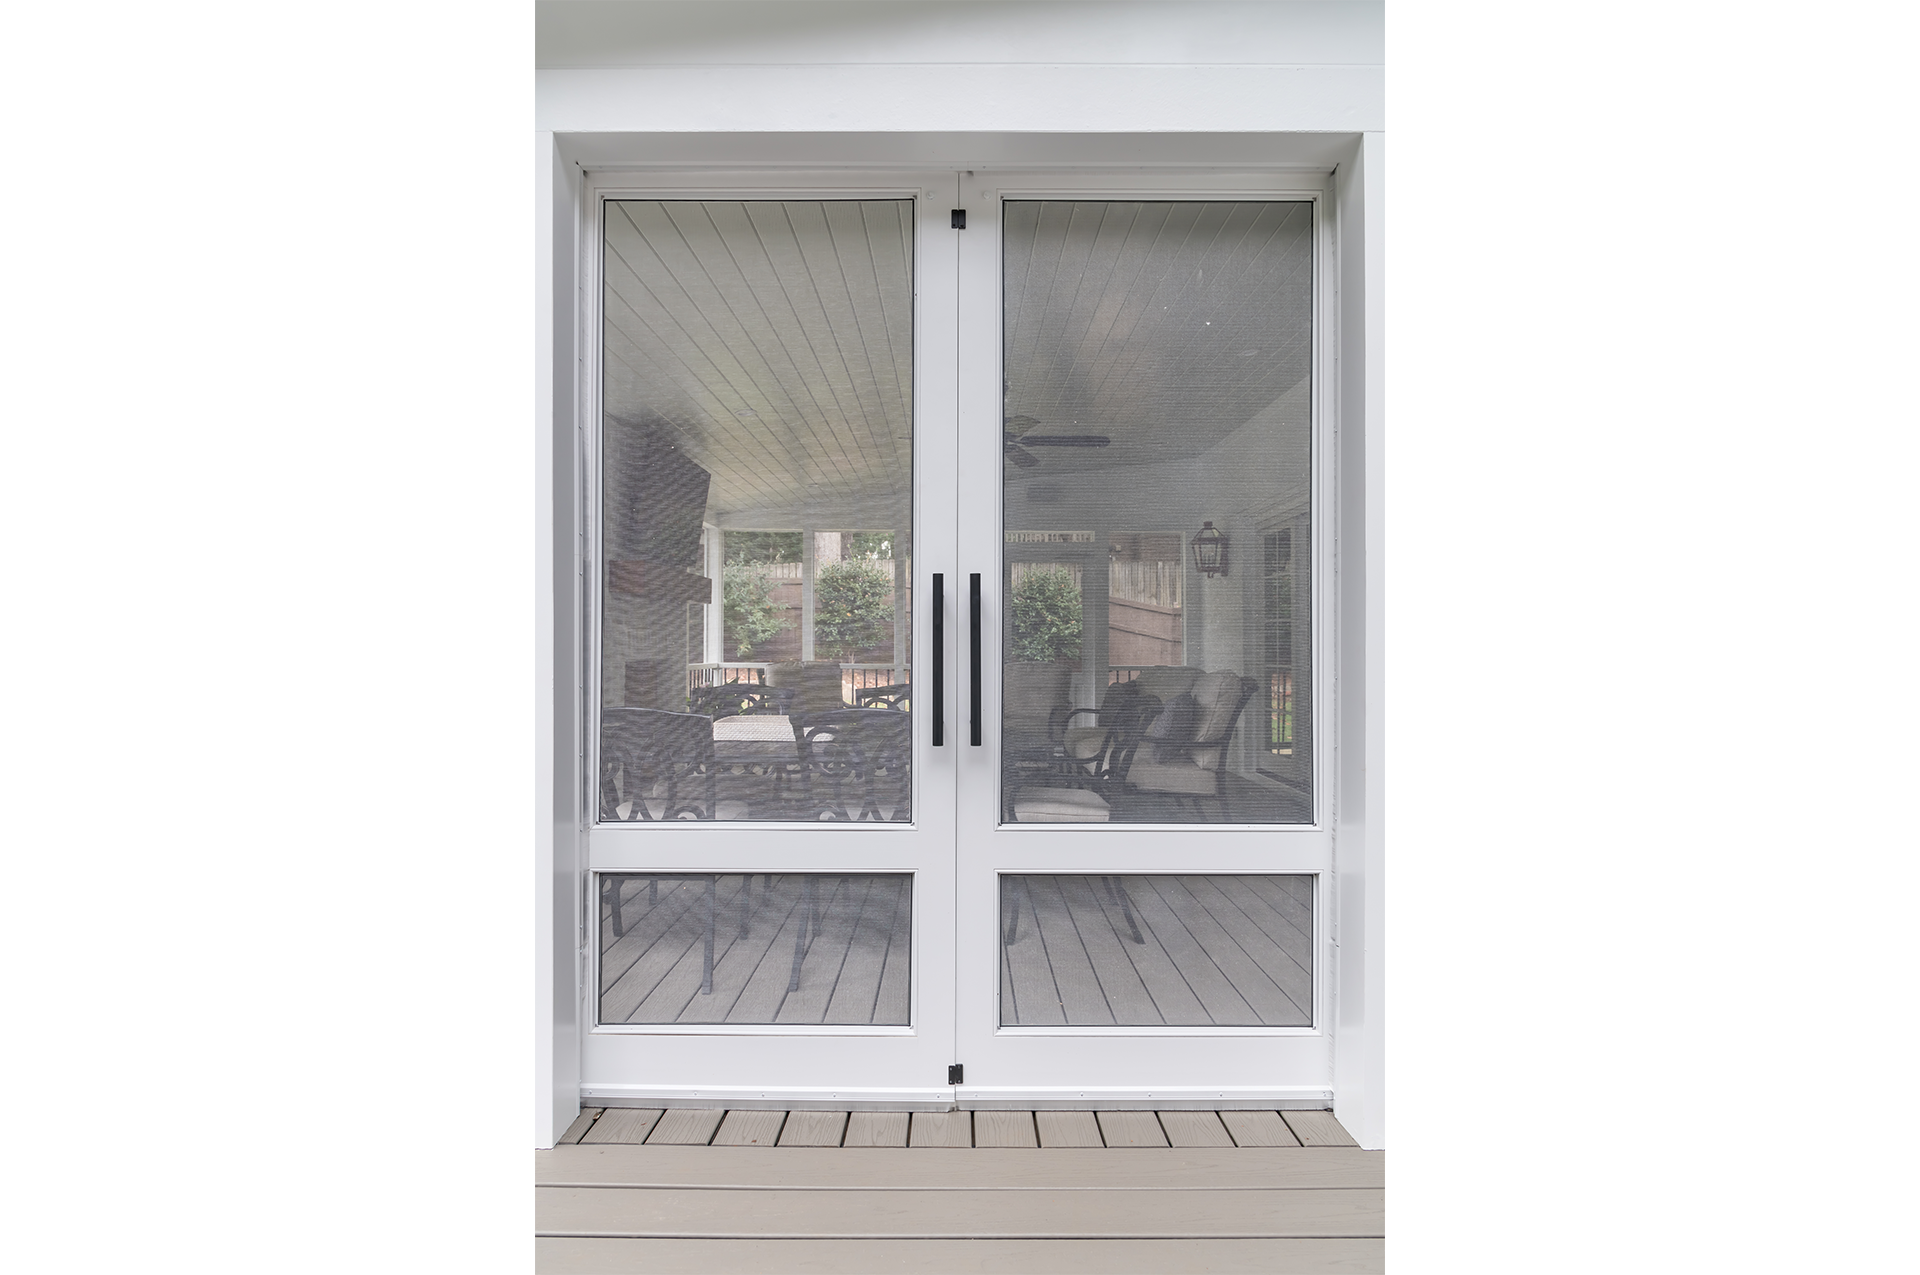 Closed screen doors on a newly remodeled screen porch